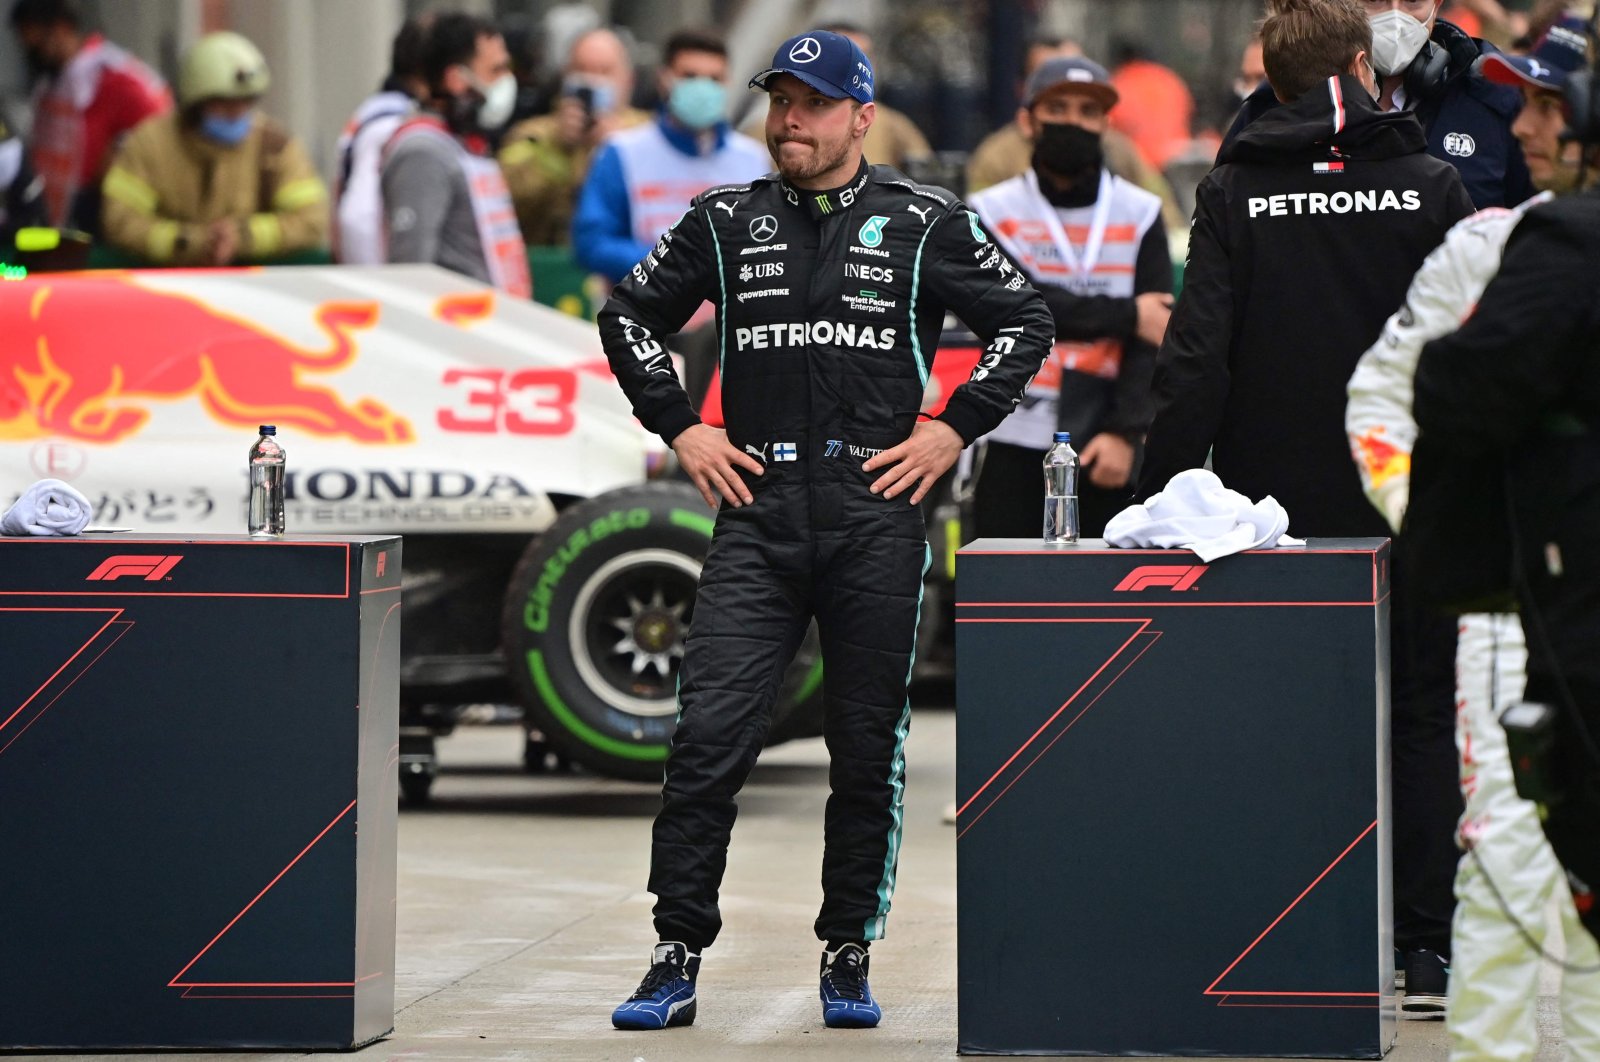 Winner Mercedes' Finnish driver Valtteri Bottas waits in the parc ferme after the Formula One Grand Prix of Turkey at the Intercity Istanbul Park in Istanbul, Turkey, Oct. 10, 2021. (AFP Photo)